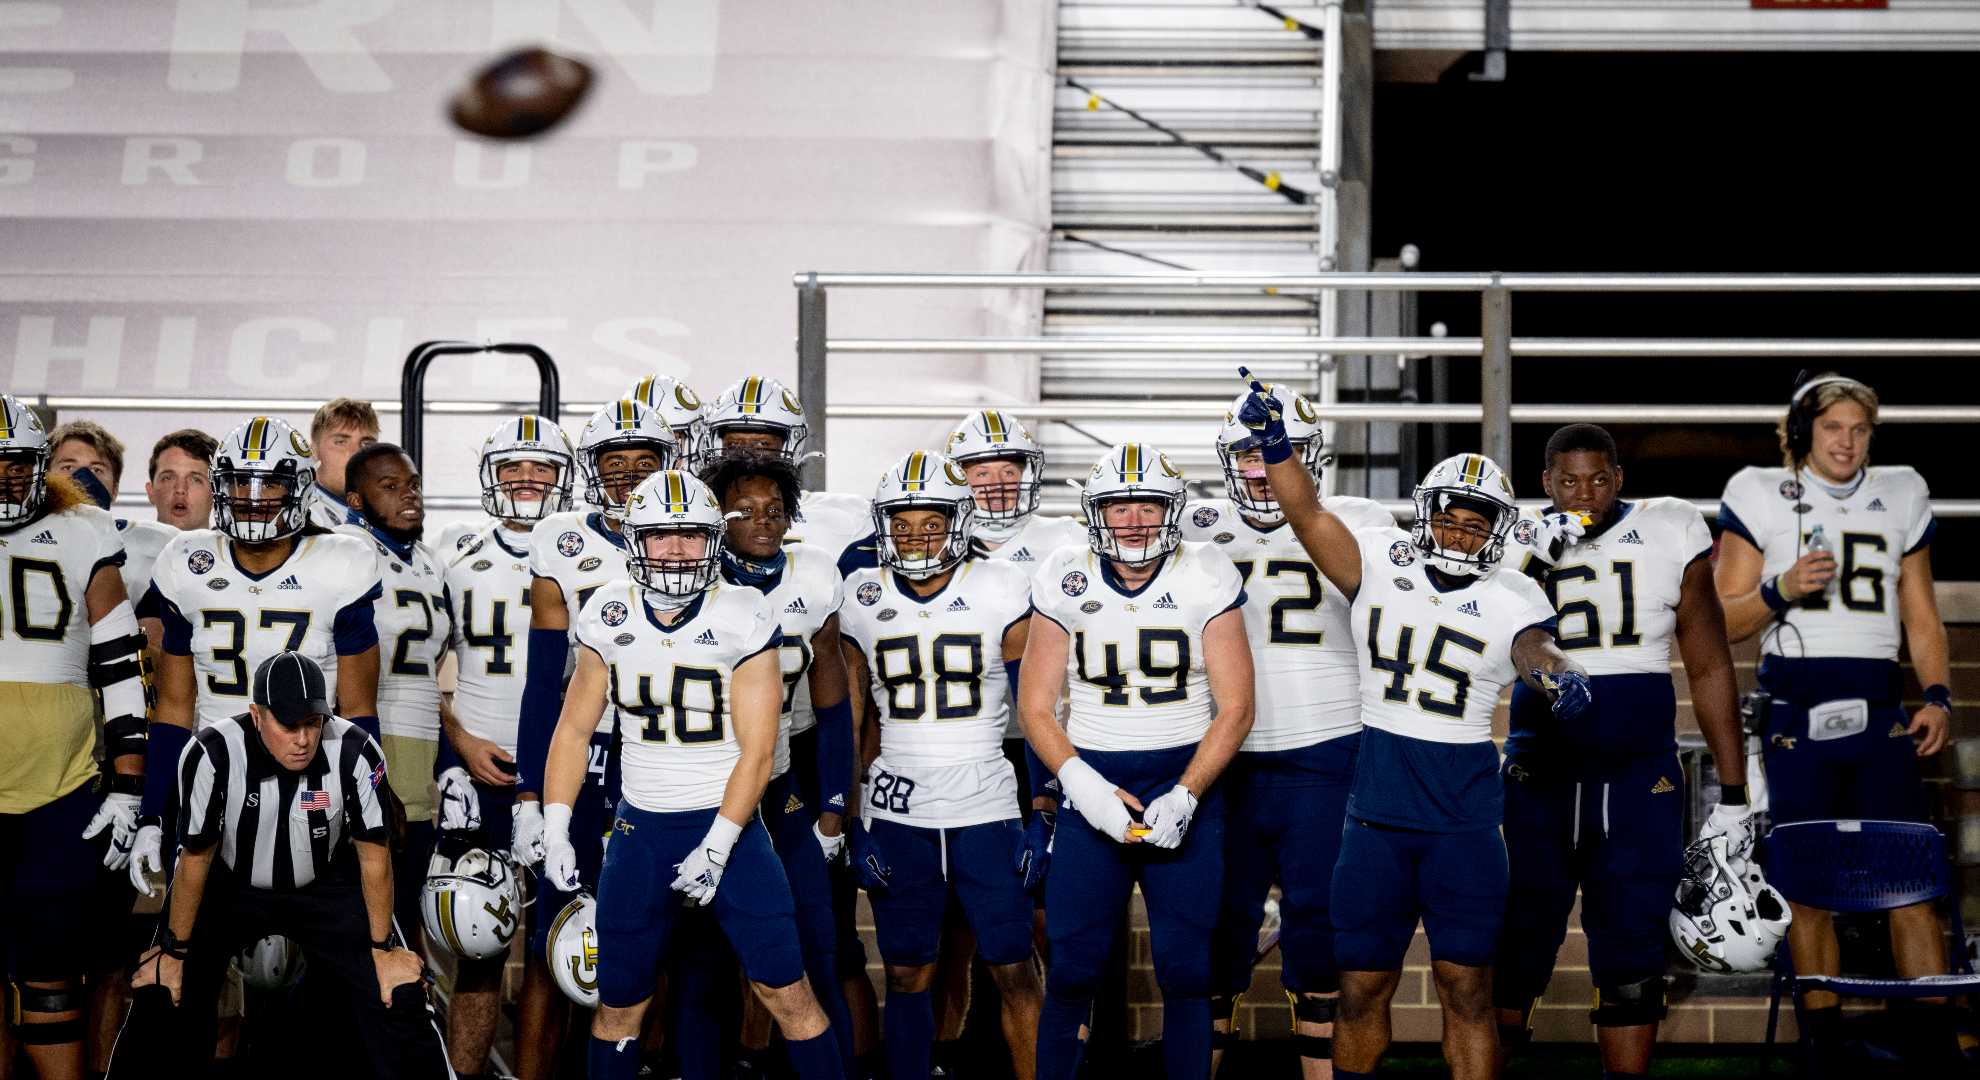 Players on the Georgia Tech Yellow Jackets bench react during the second half against the Boston College Eagles at Alumni Stadium on October 24, 2020 in Chestnut Hill, Massachusetts. (Photo by Maddie Malhotra/Getty Images)